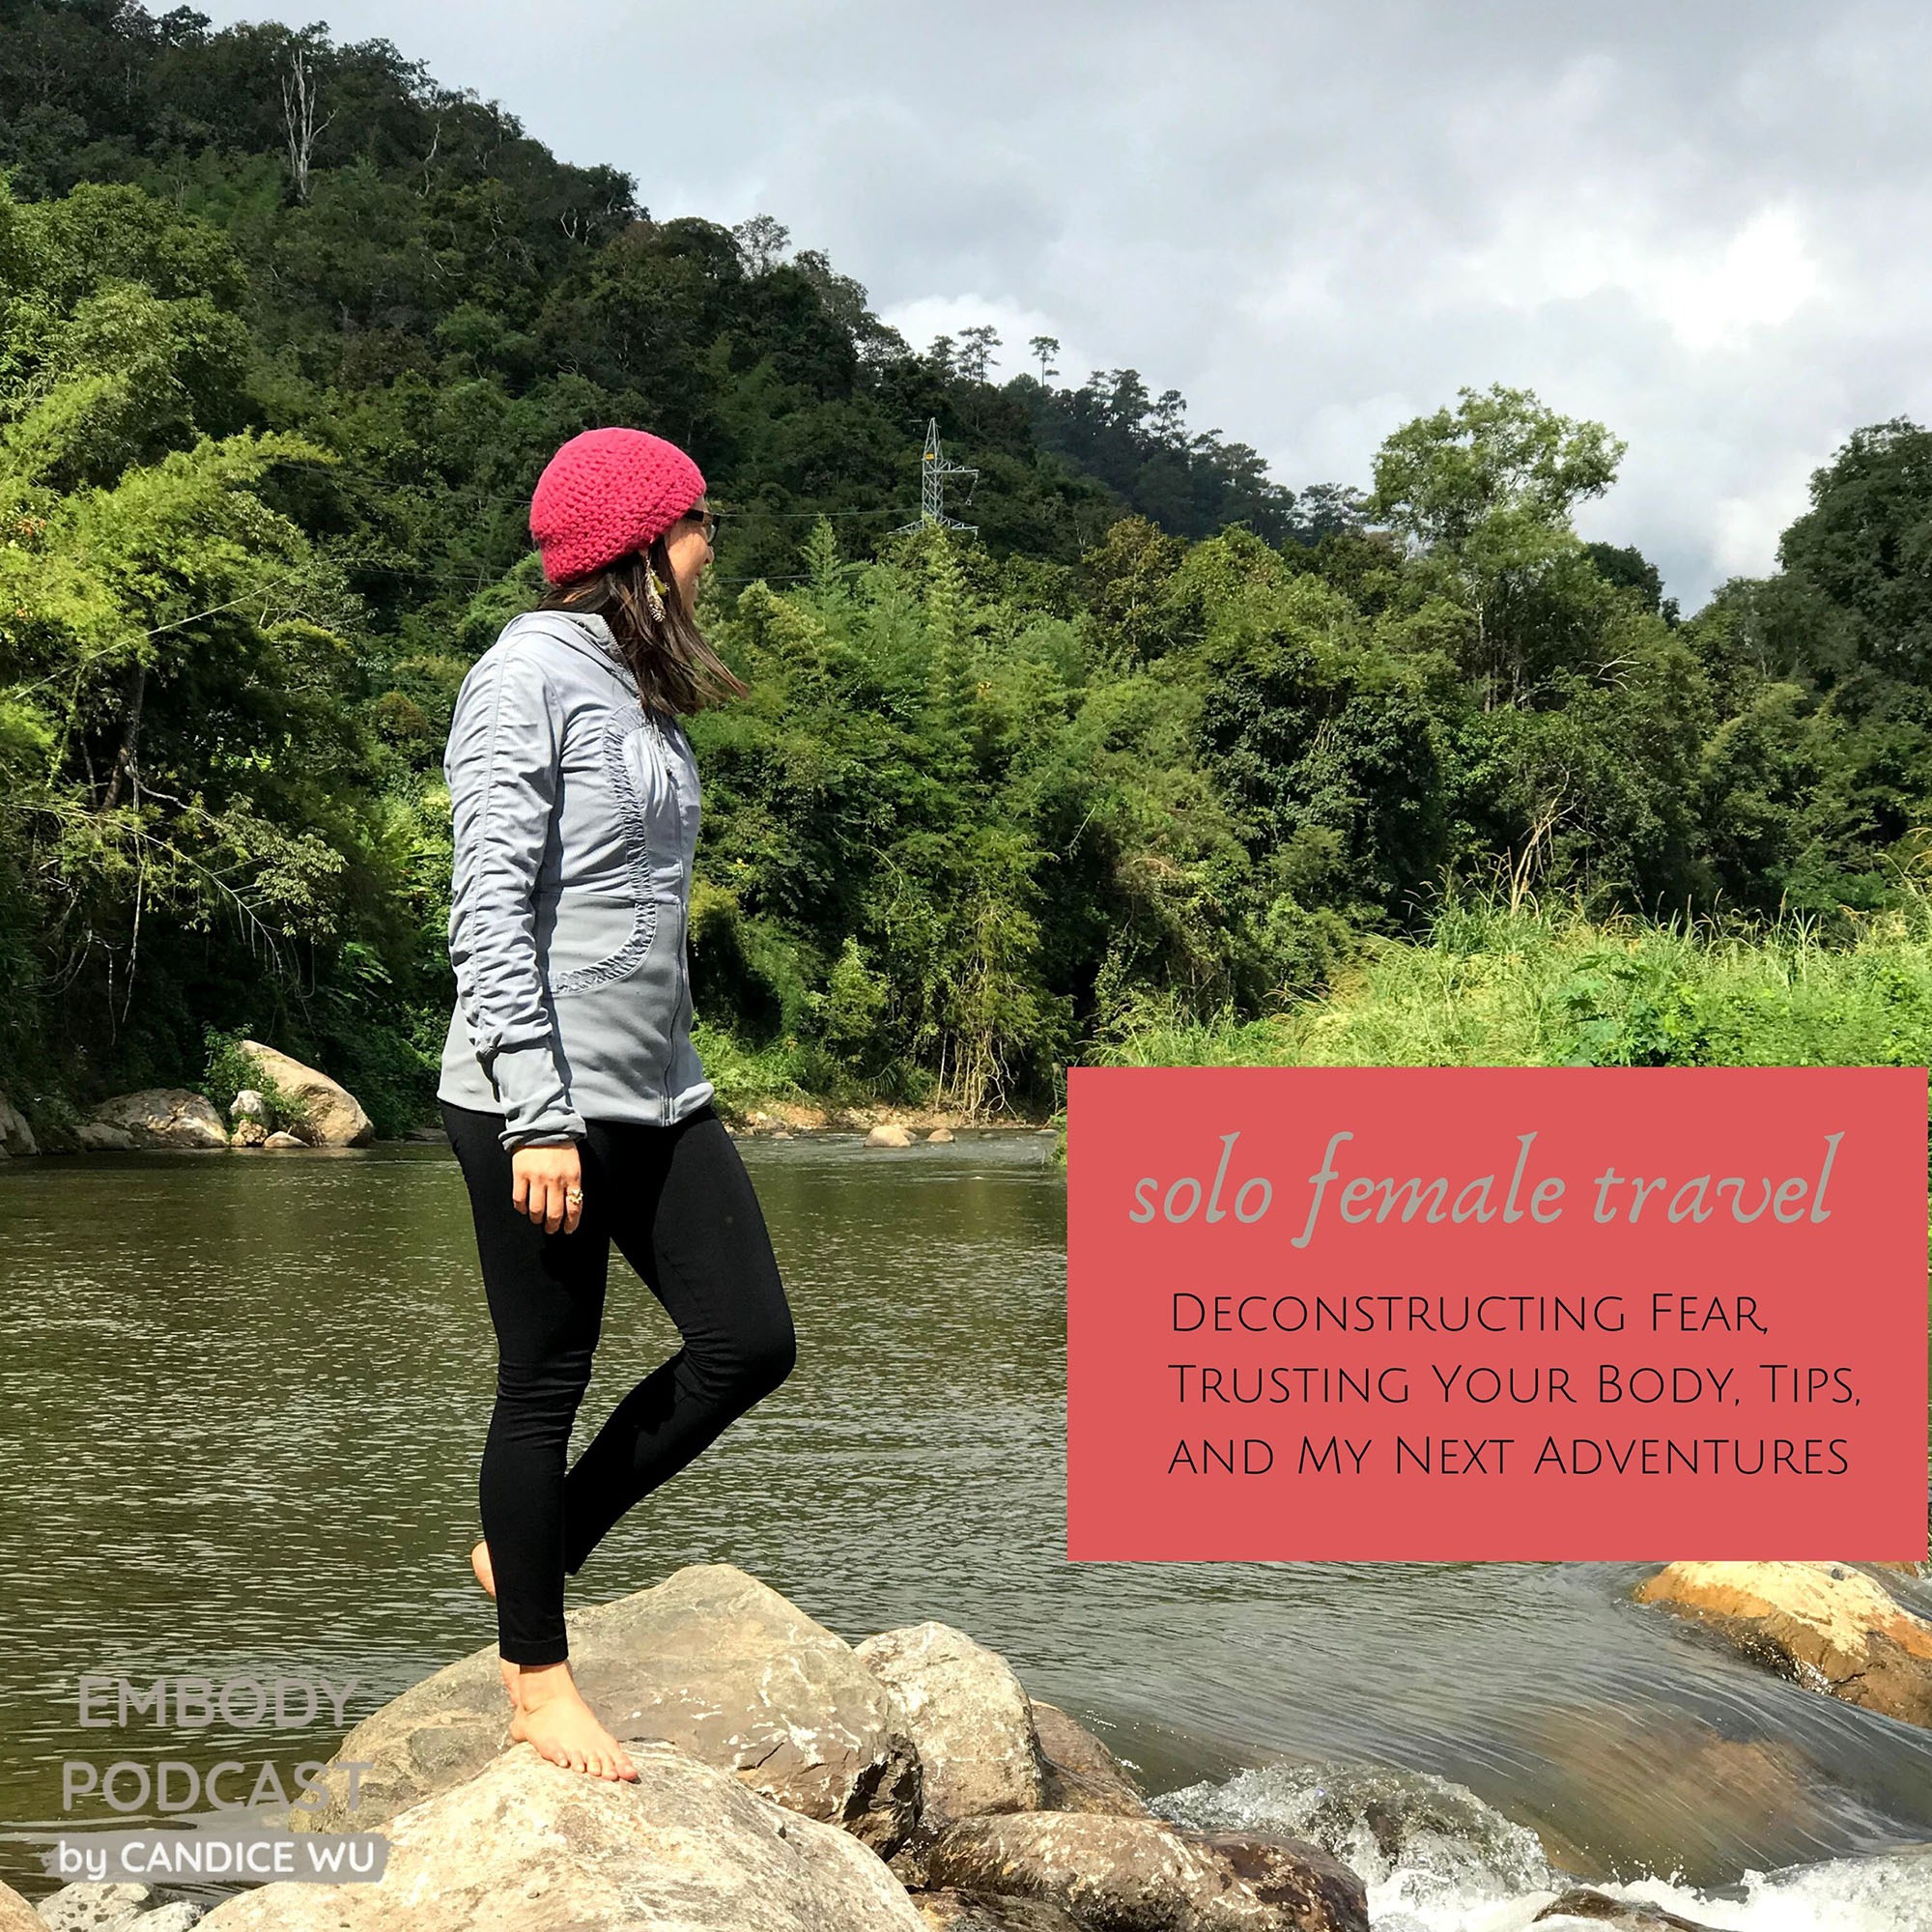 109: Solo Female Travel: Deconstructing Fear, Trusting Your Body, Practical Tips, My Next Adventures